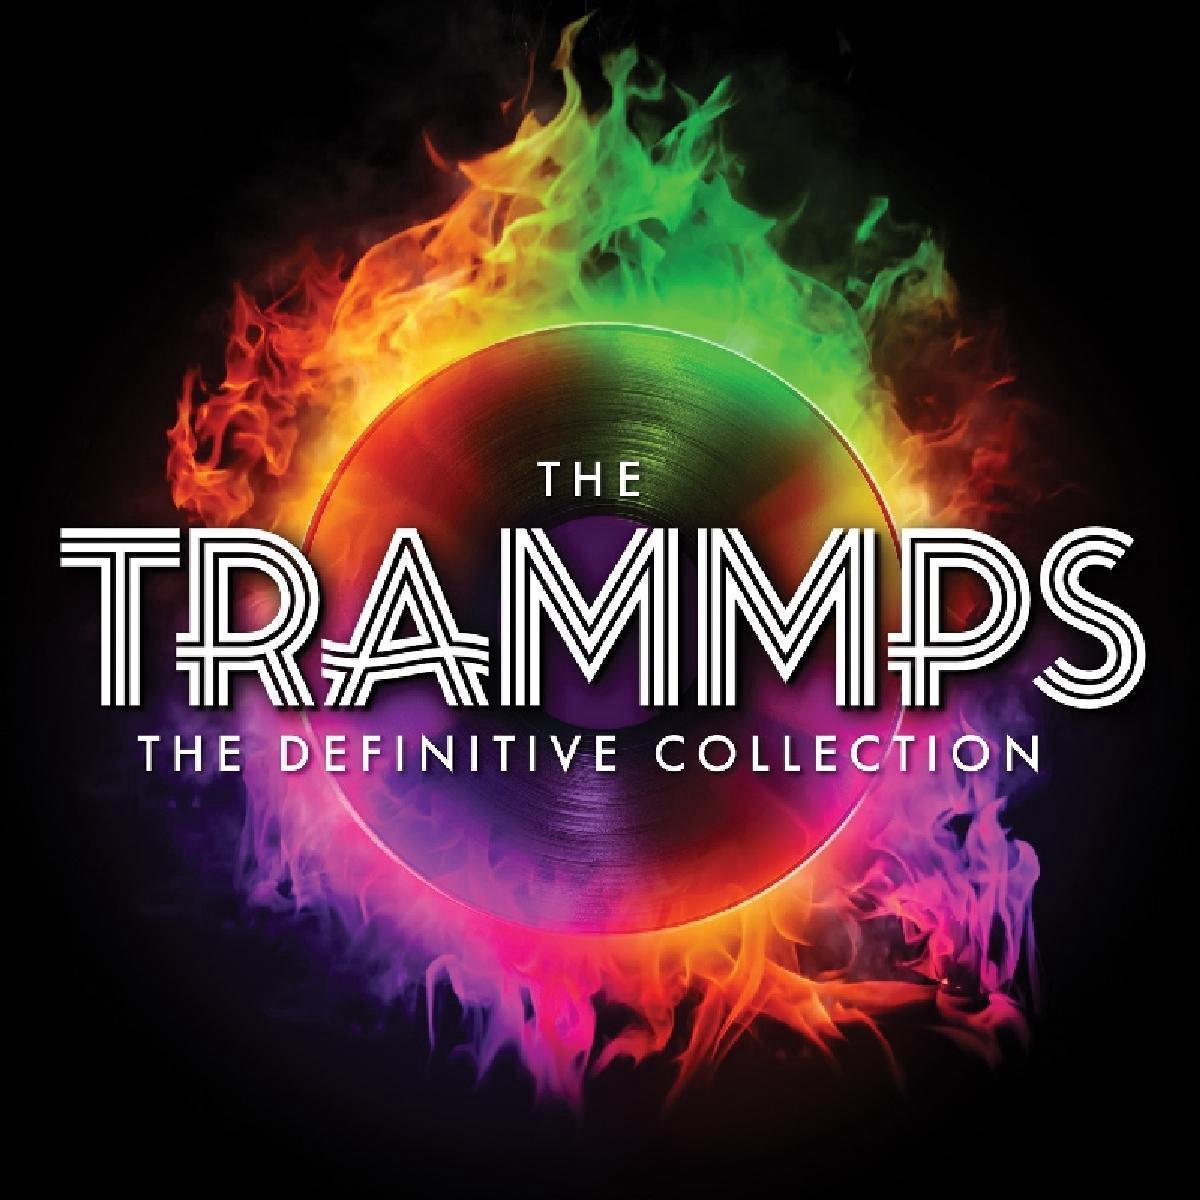 The Definitive Collection - The Trammps